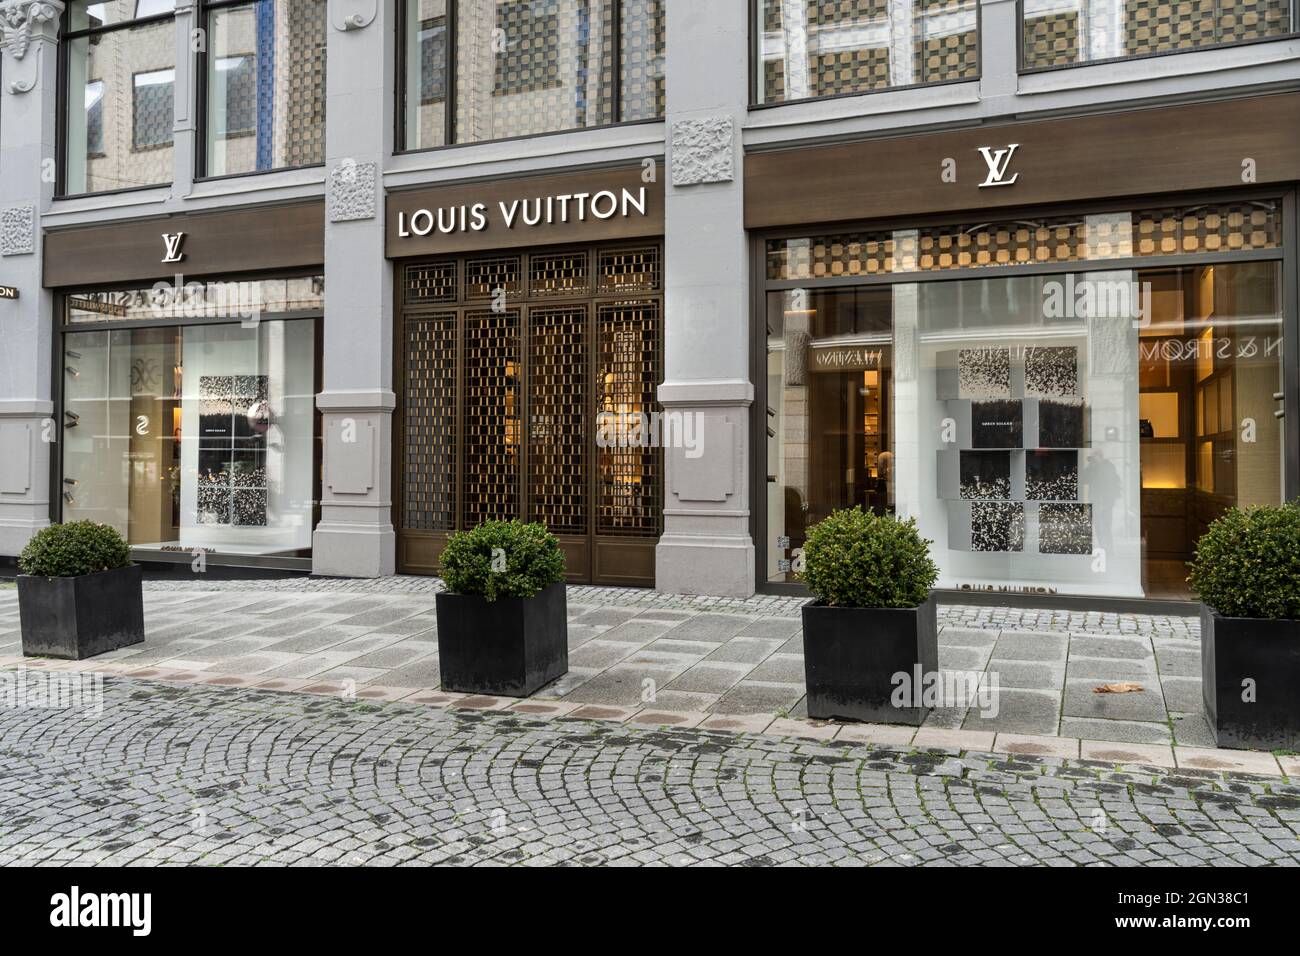 Oslo, Norway. September 2021.  the shop window of the Louis Vuitton brand shop in the city center street Stock Photo